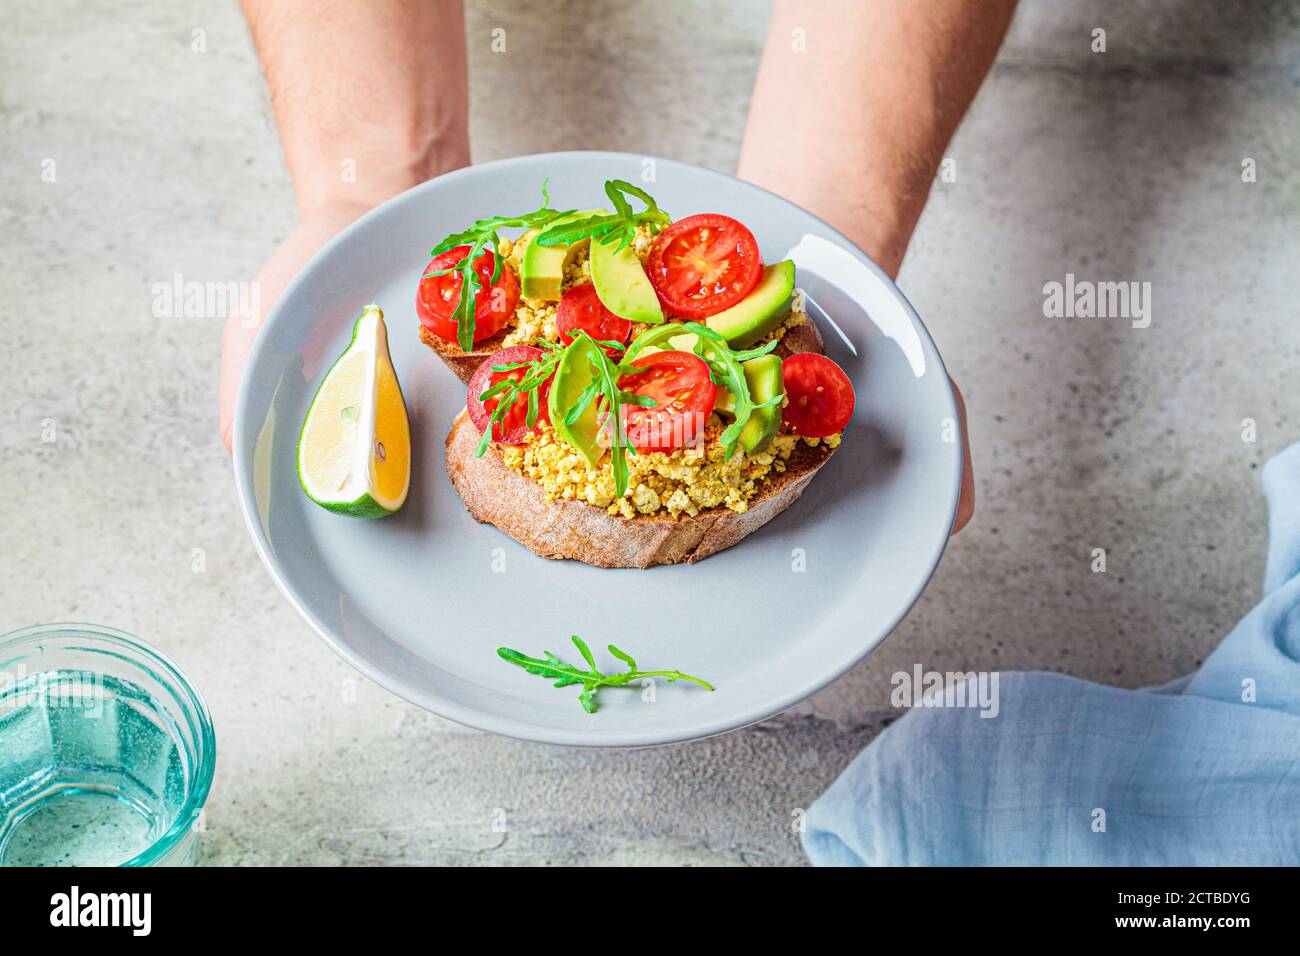 Tofu scrambled sandwich with avocado, arugula and tomato on a gray plate. Healthy vegan food concept. Stock Photo